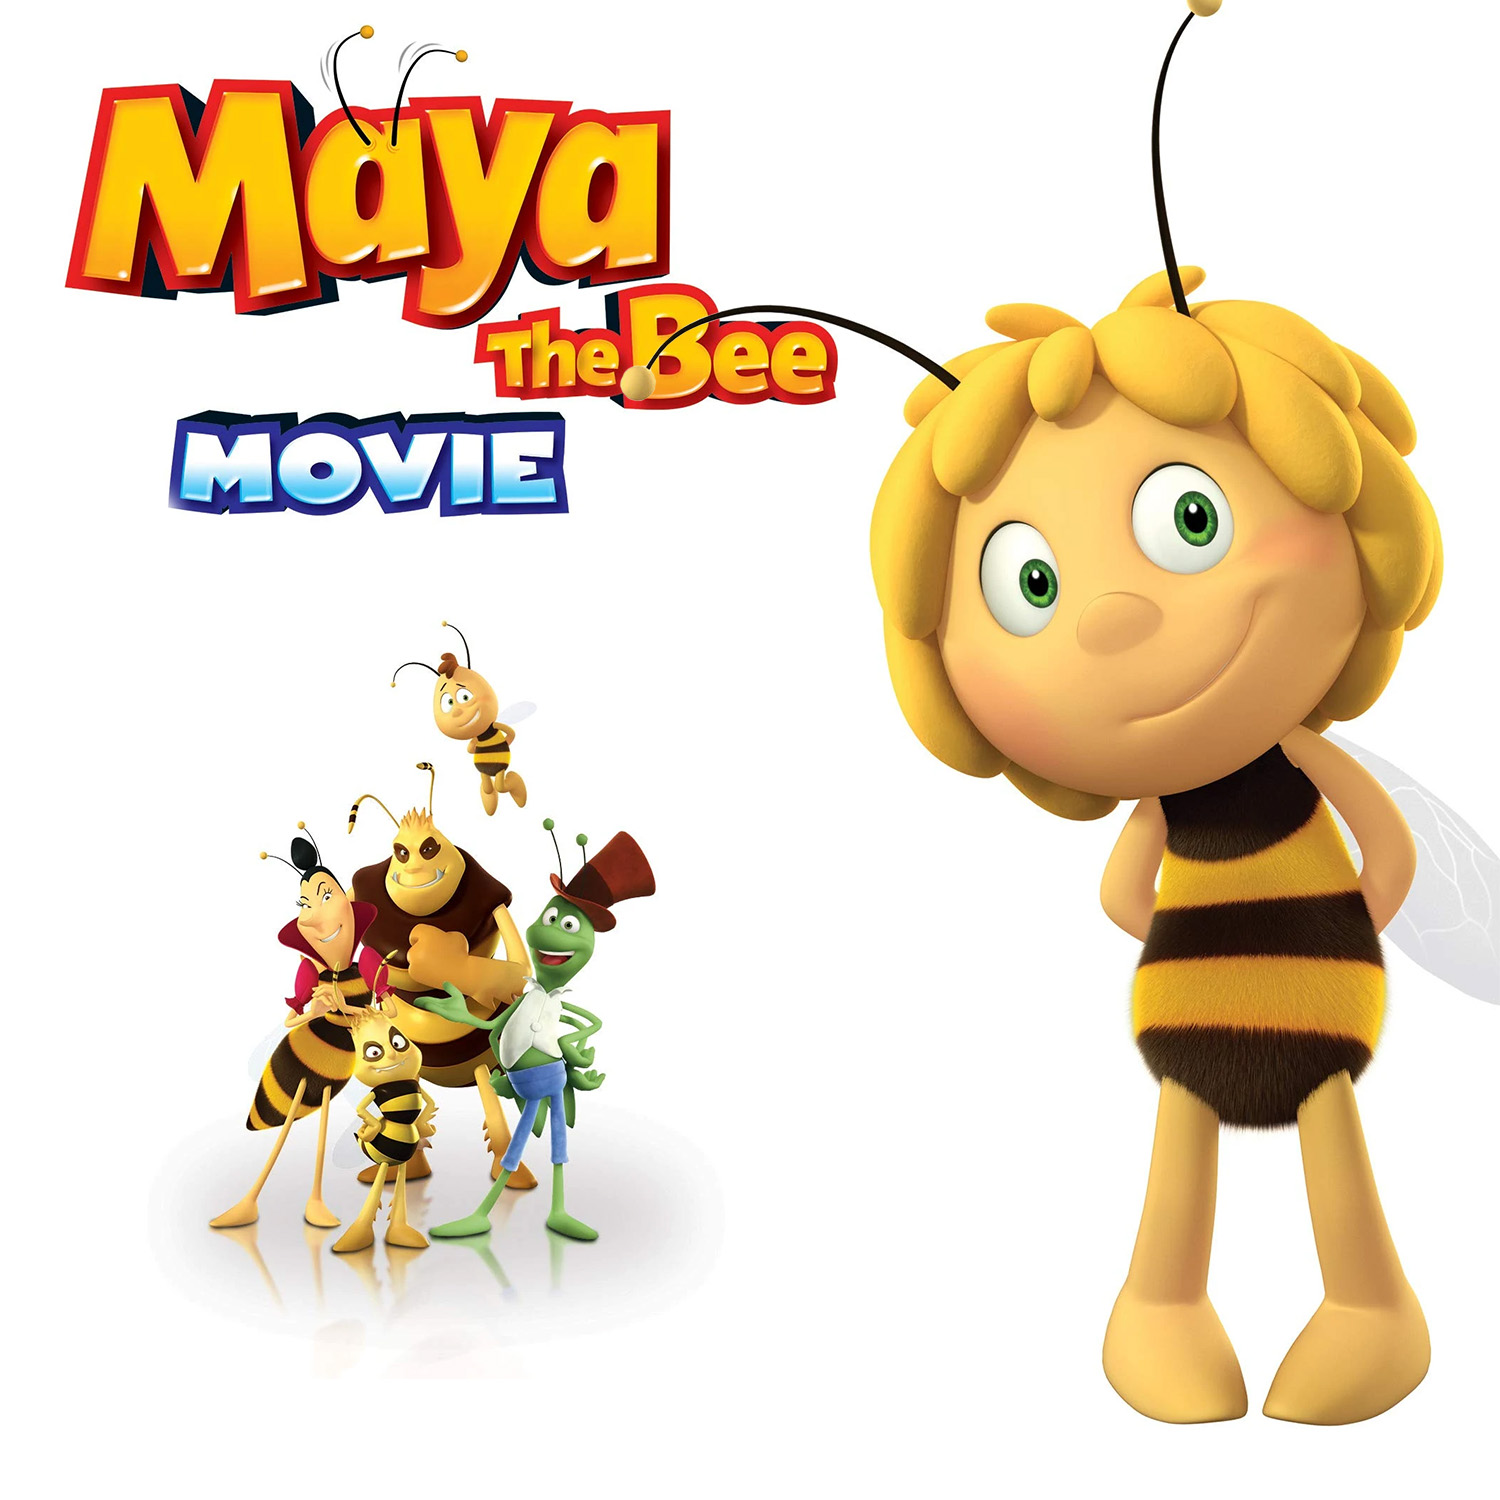 Maya The Bee - Animated Feature Film